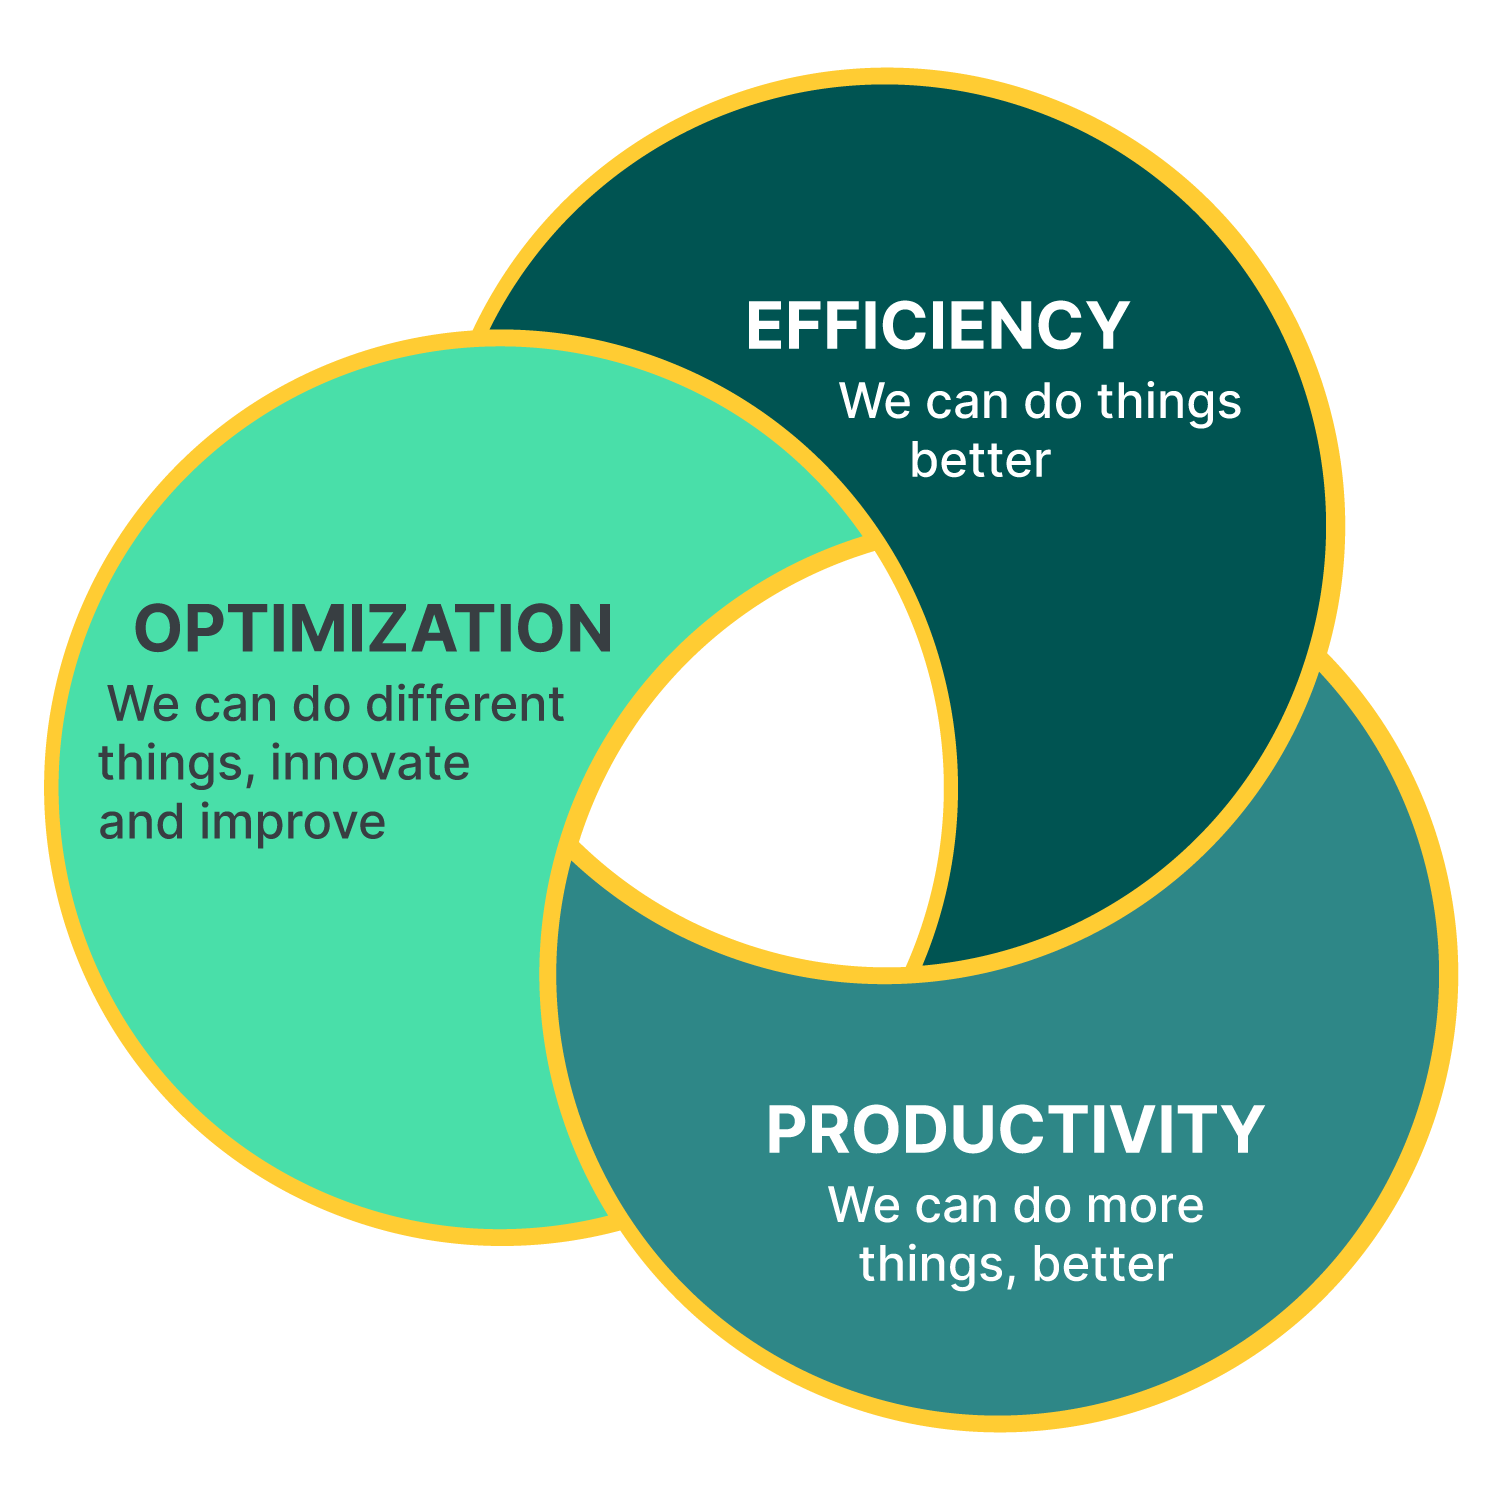 Efficiency, productivity, optimization circle together in a Venn diagram